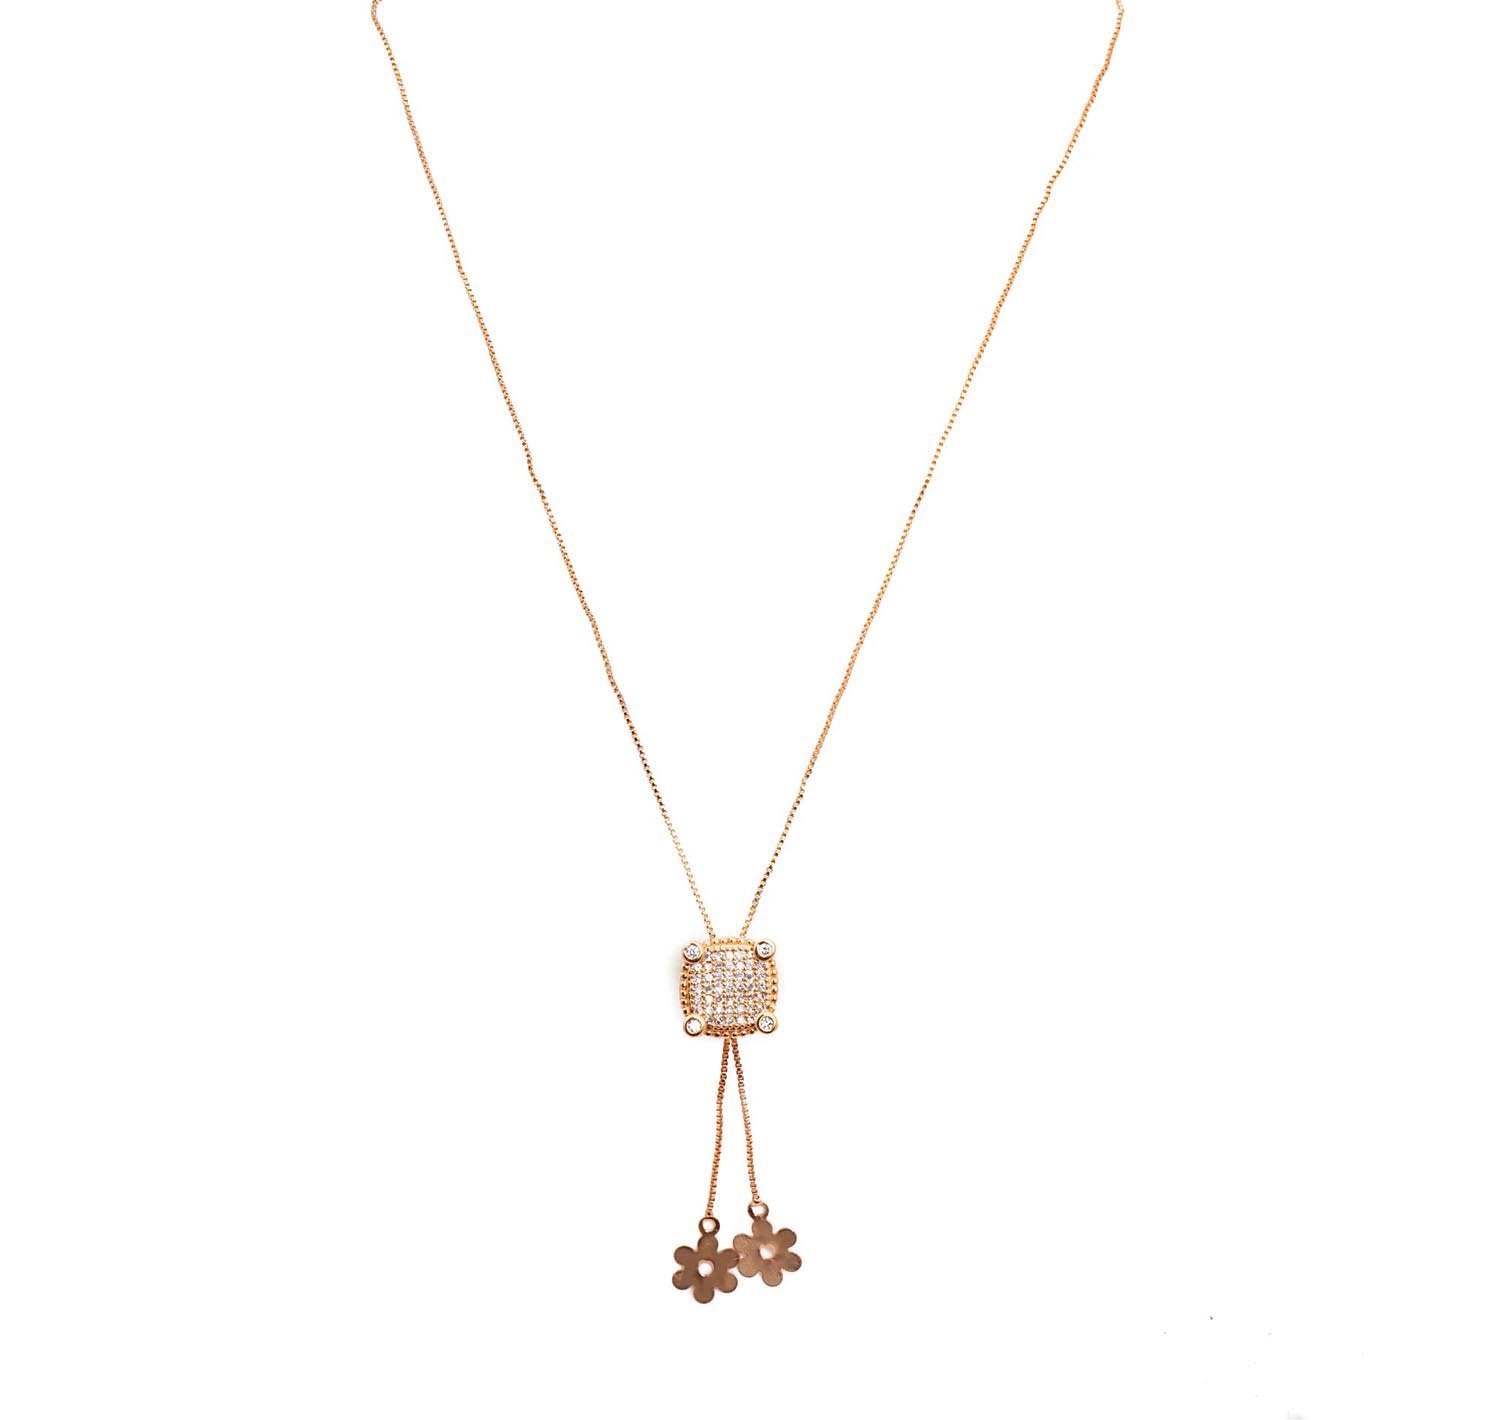 Fashionable Rose Gold Neckwear studded with American Diamond.